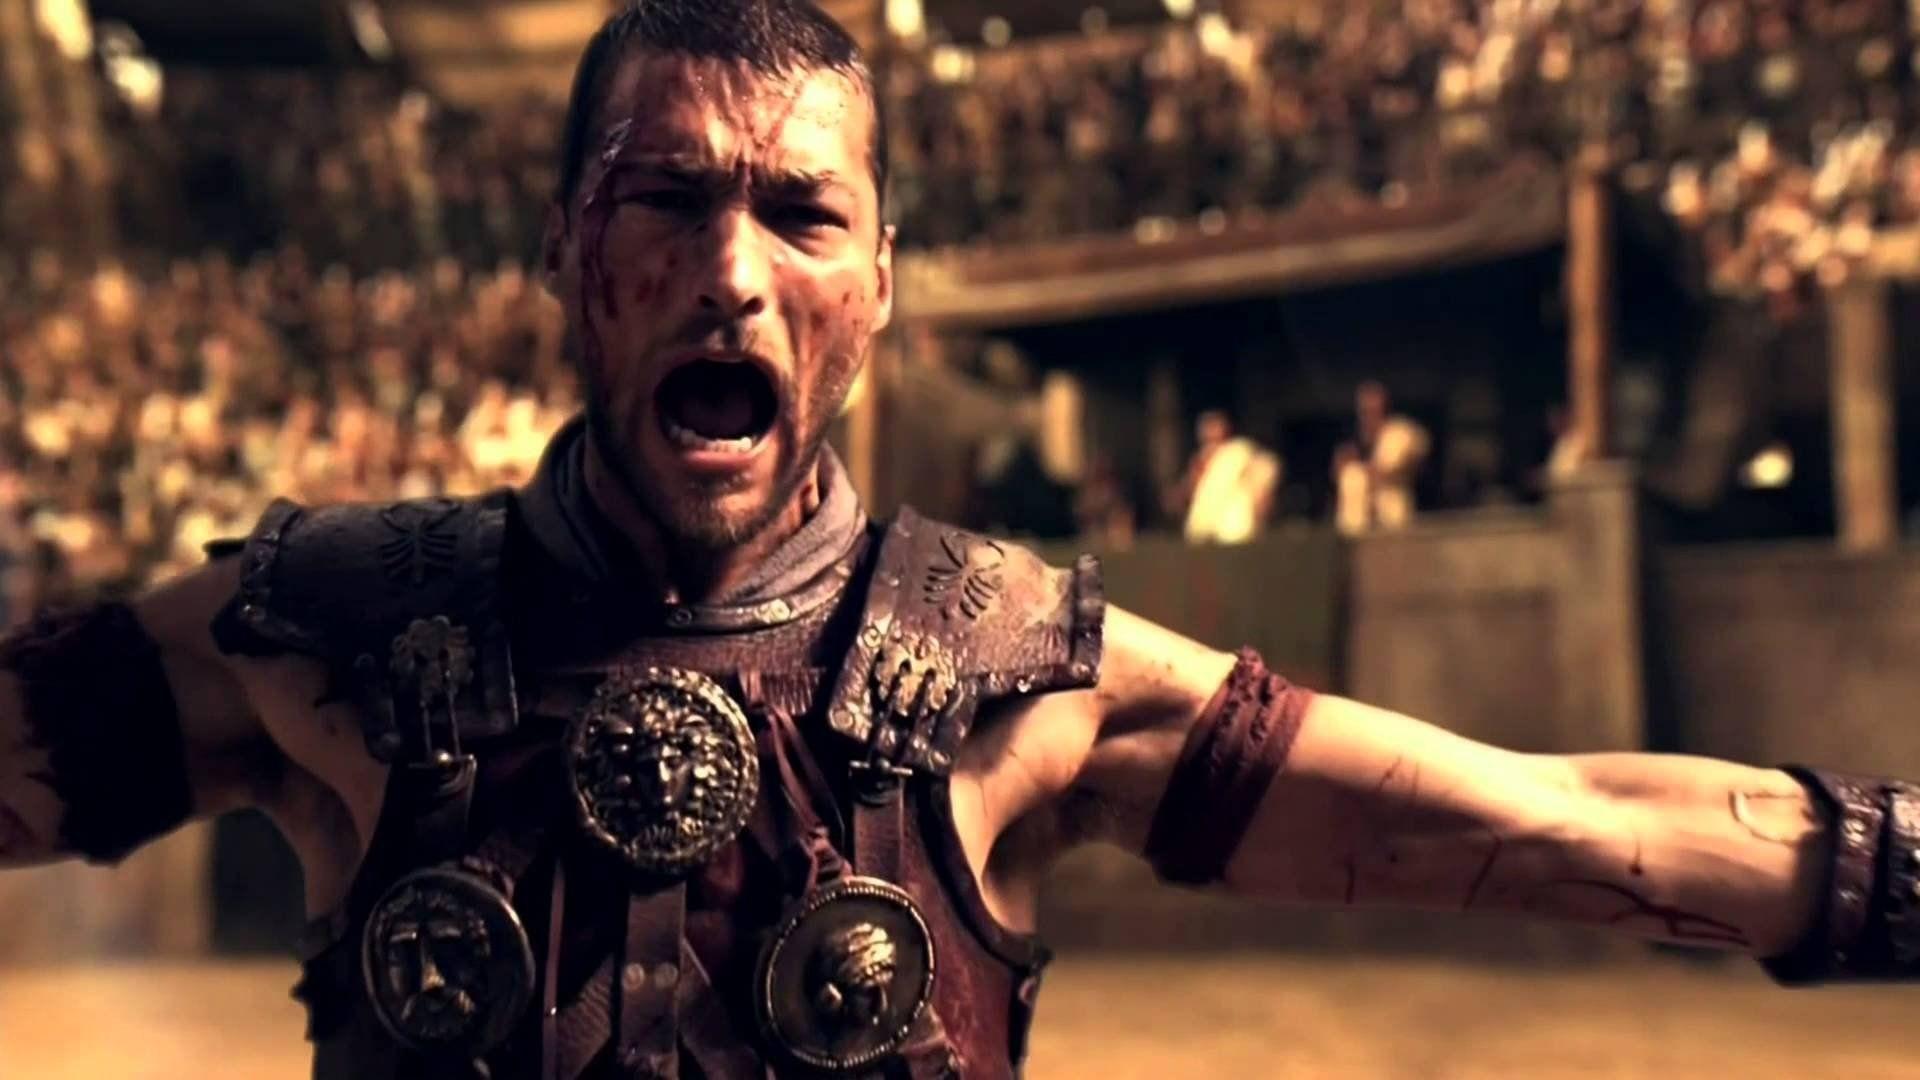 image For > Spartacus Wallpaper 1920x1080